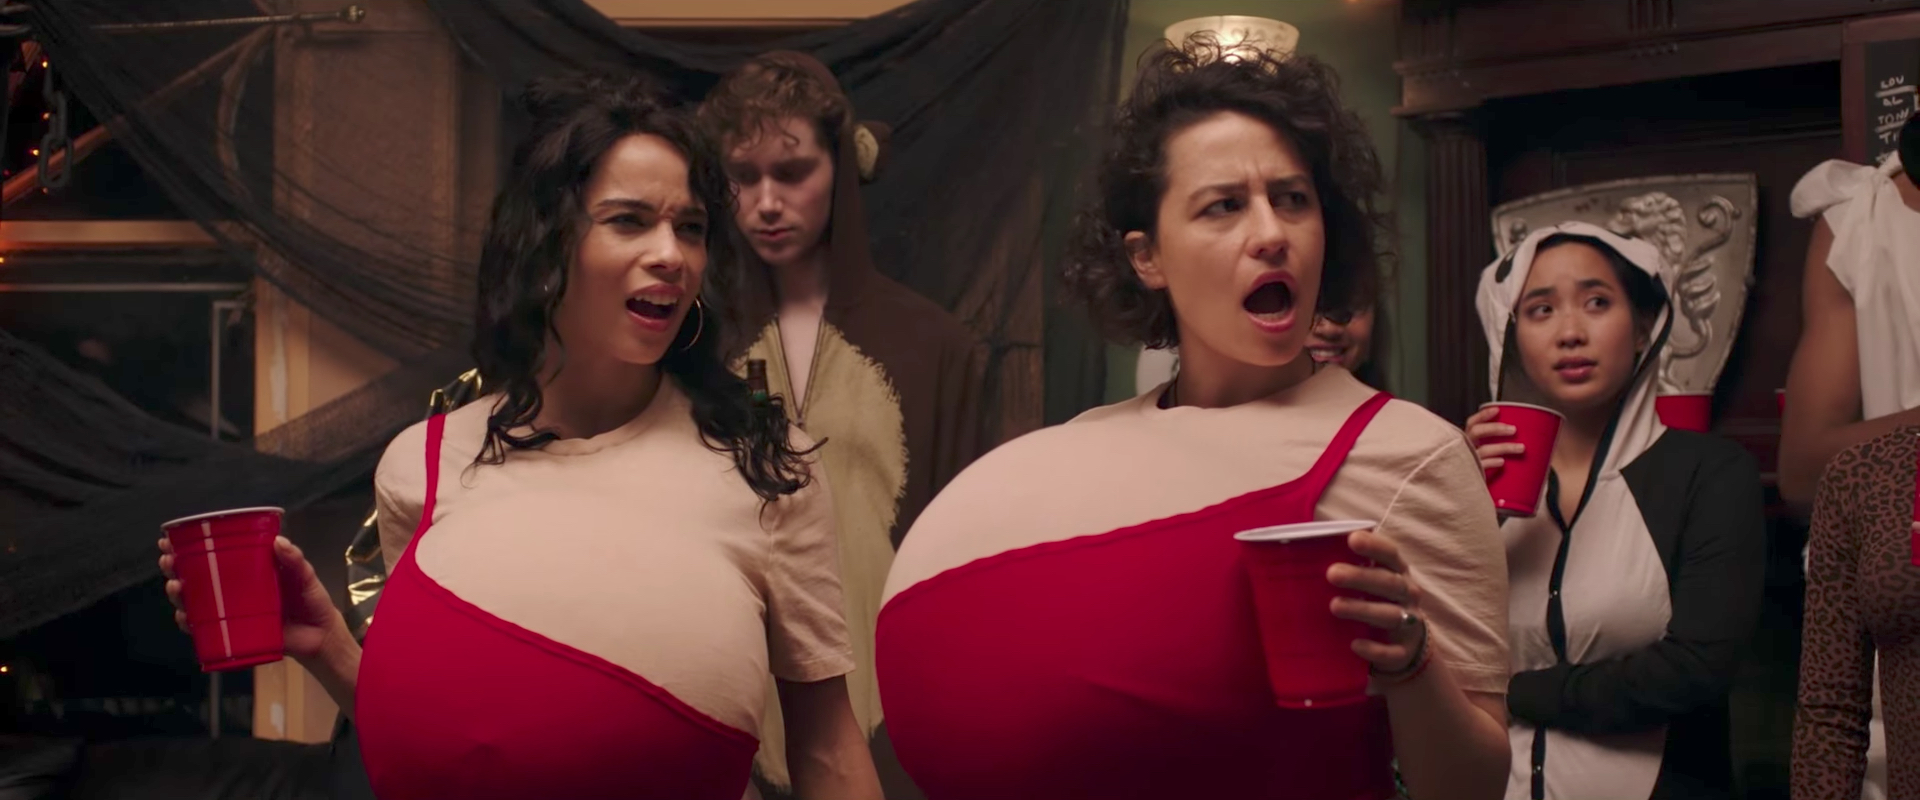 Rough Night' Is a Monumental Portrayal of Queer Women On-Screen